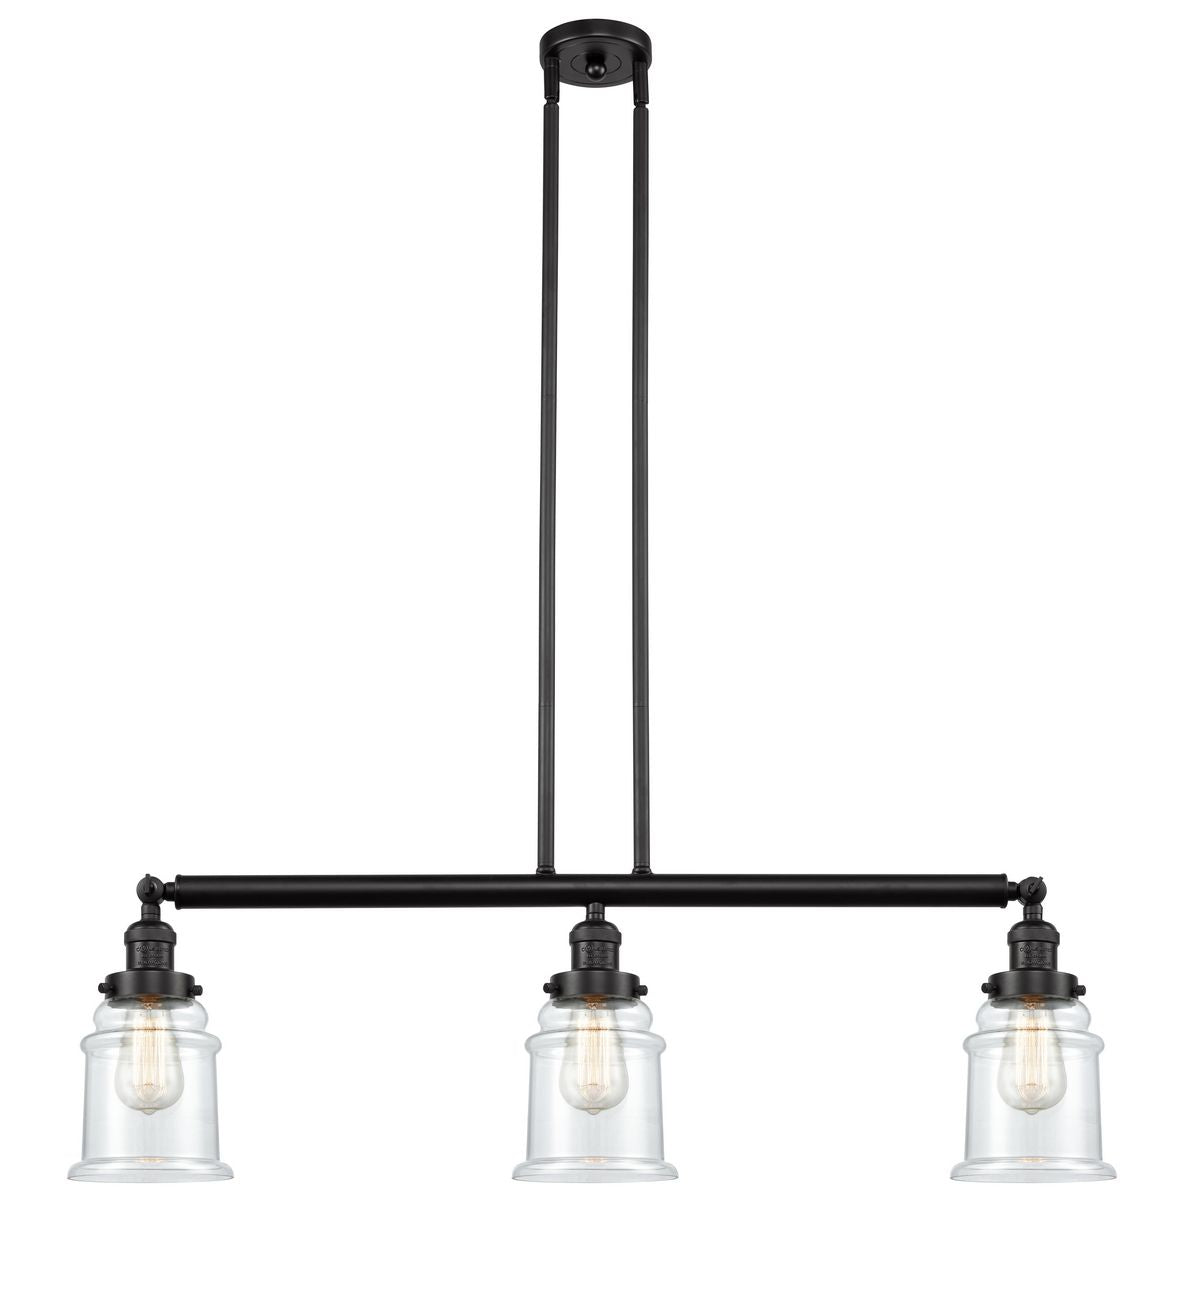 213-OB-G182 3-Light 38.5" Oil Rubbed Bronze Island Light - Clear Canton Glass - LED Bulb - Dimmensions: 38.5 x 6 x 11<br>Minimum Height : 21.5<br>Maximum Height : 45.5 - Sloped Ceiling Compatible: Yes